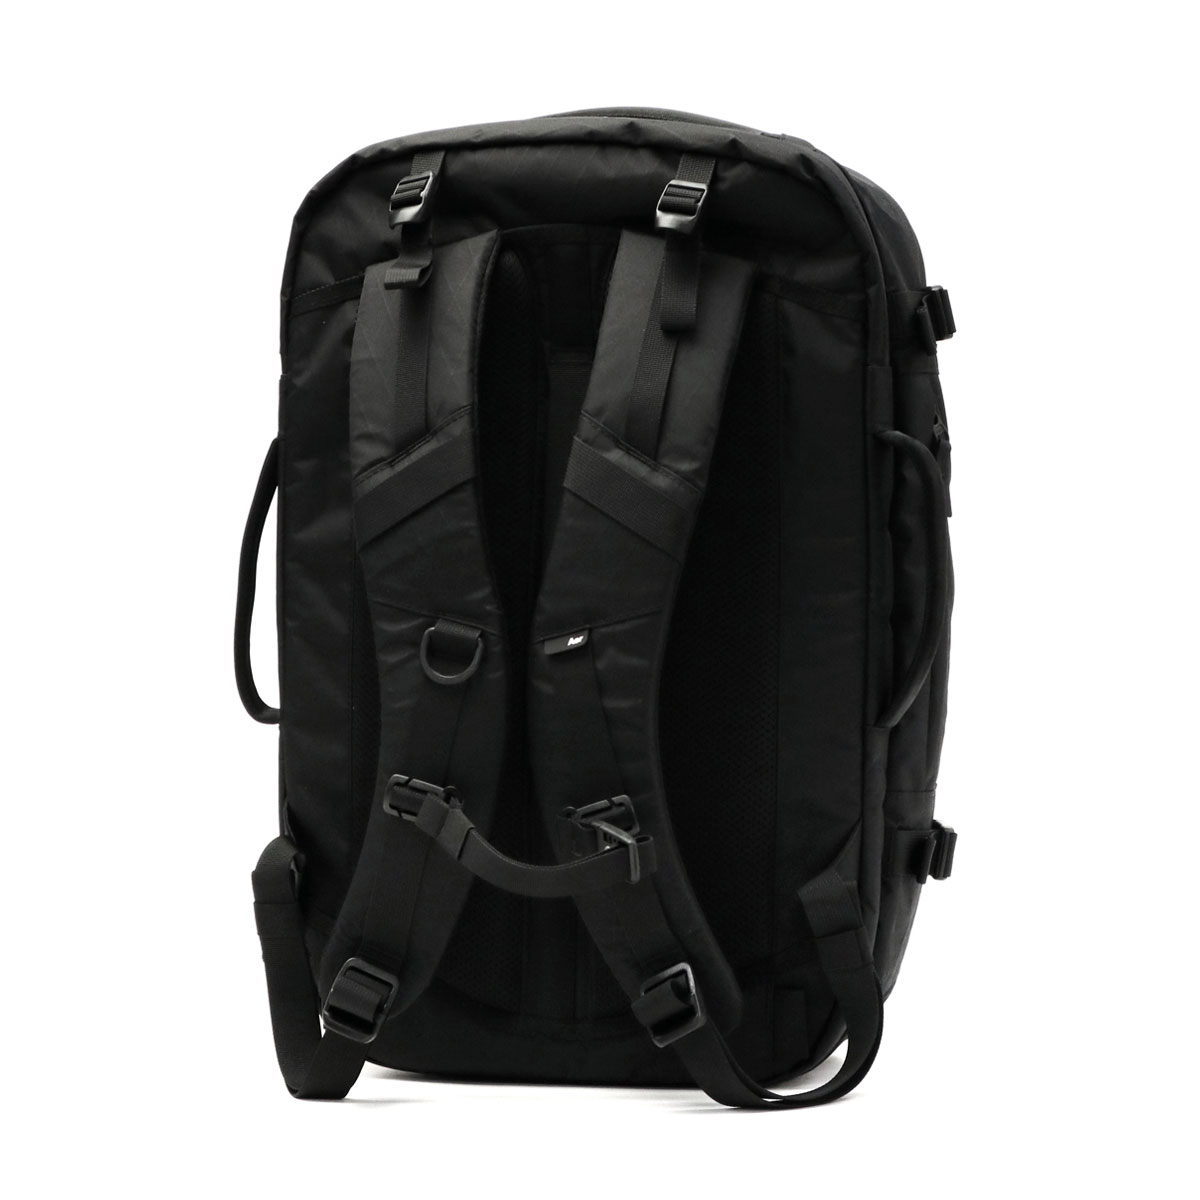 Aer エアー Travel Collection Travel Pack 3 X-Pac バックパック 35L